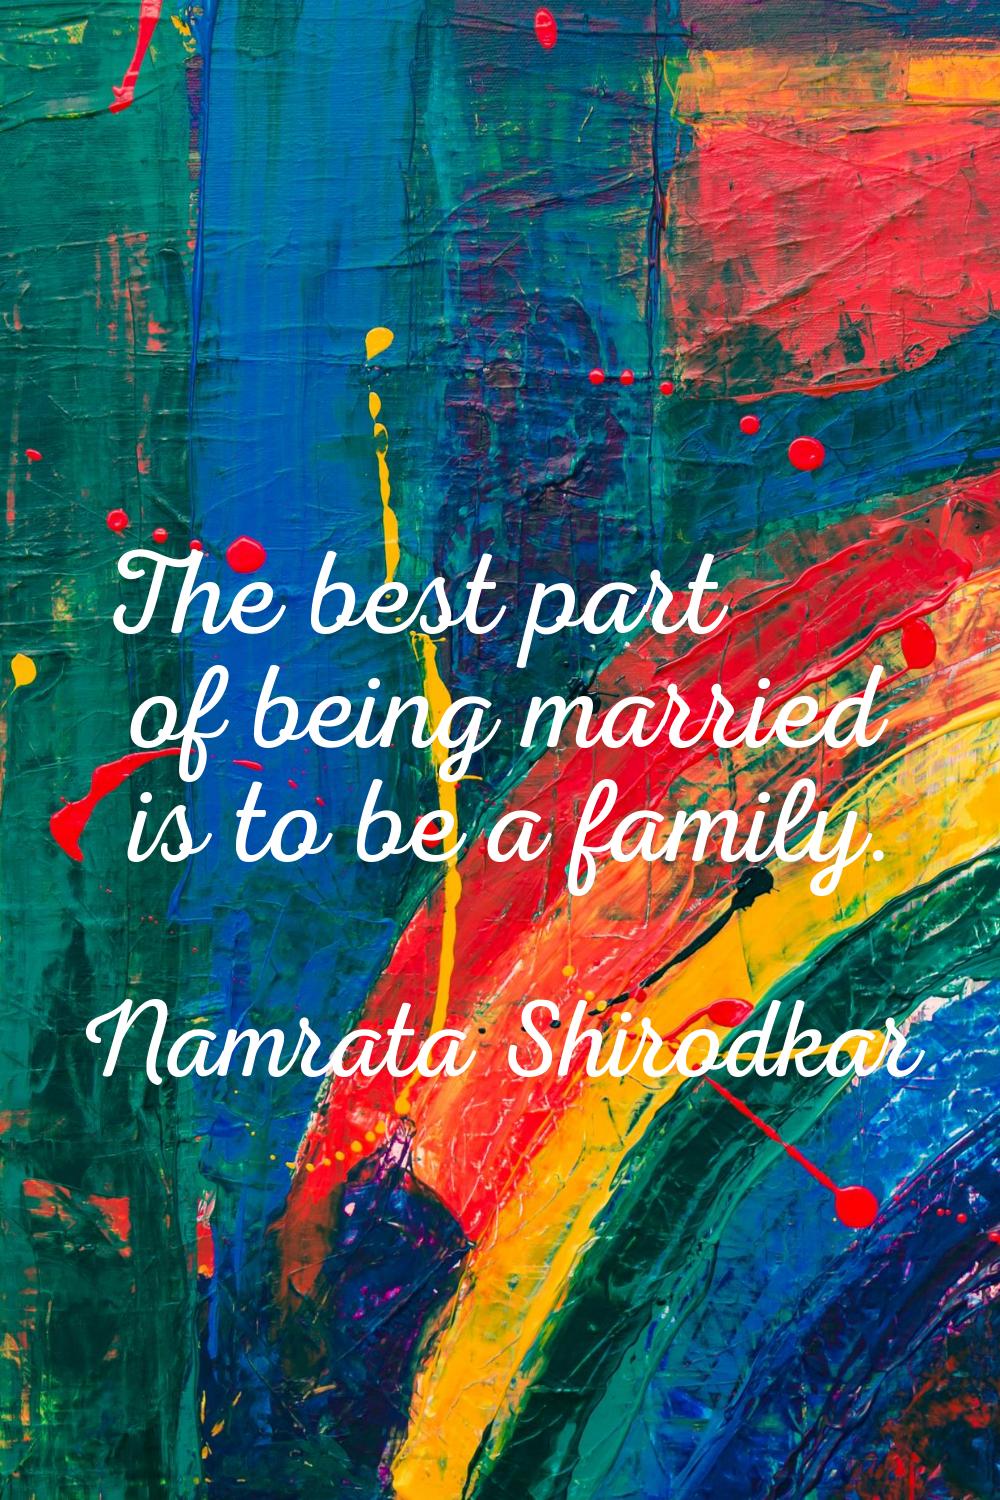 The best part of being married is to be a family.